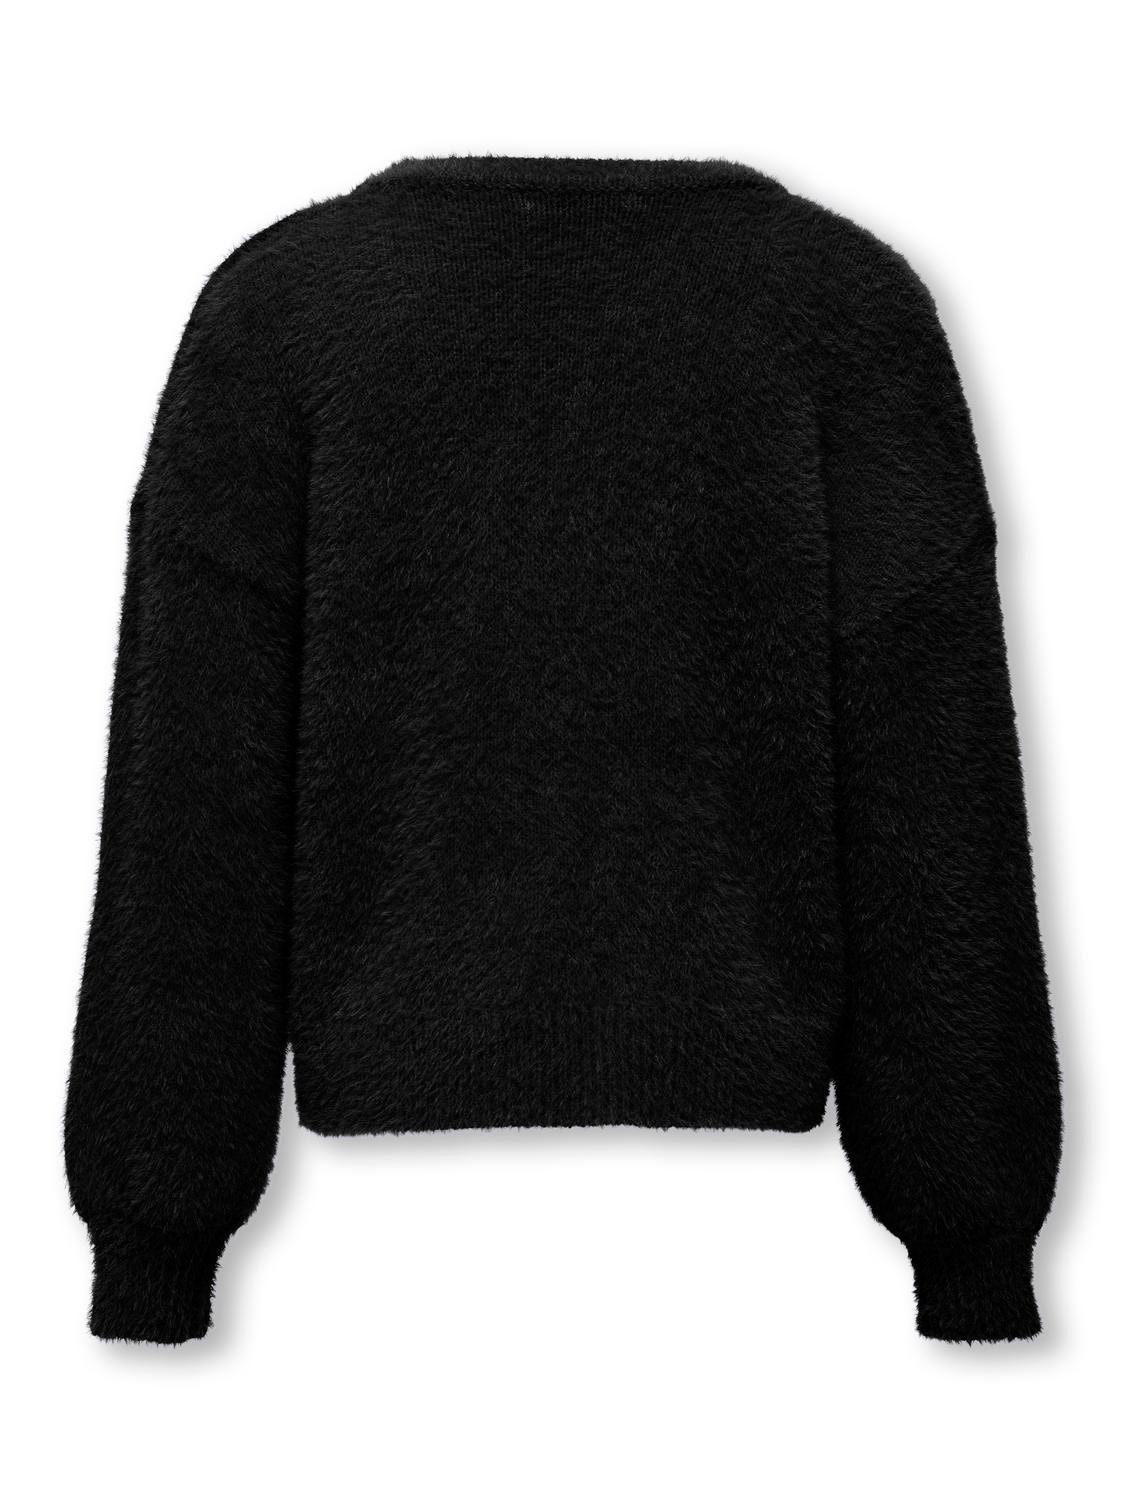 ONLY O-neck knitted pullover -Black - 15306452